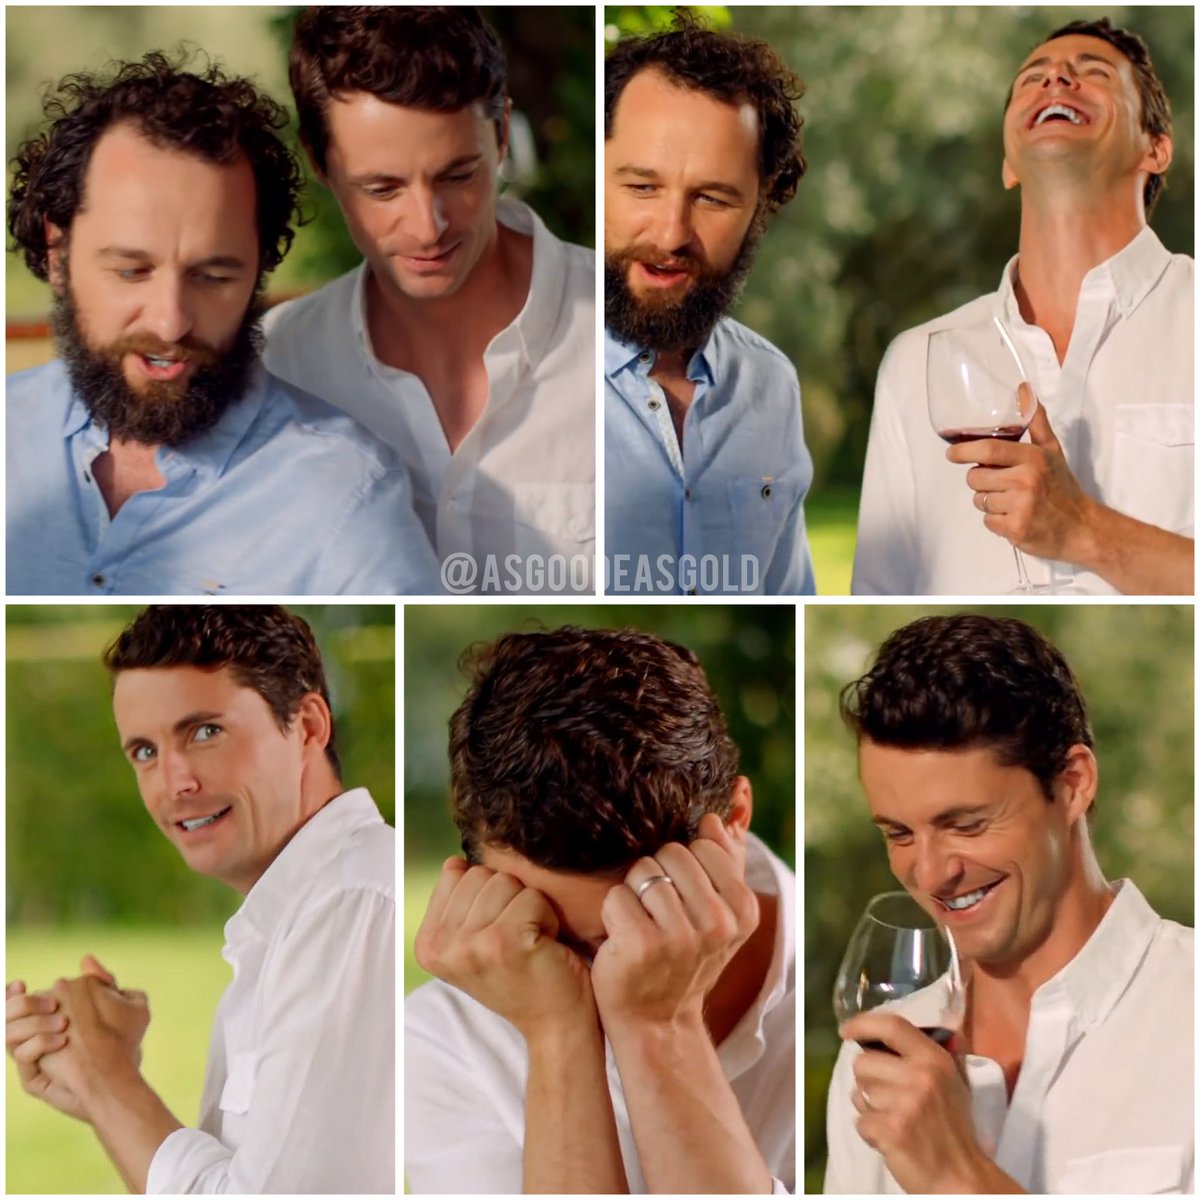 A little fun for Monday morning from favourite goofballs Matthew Rhys and Matthew Goode. Love them, miss them. 
📷 My edits from The Wine Show outtakes
#matthewgoode #matthewrhys #thewineshow #thewineshowtv